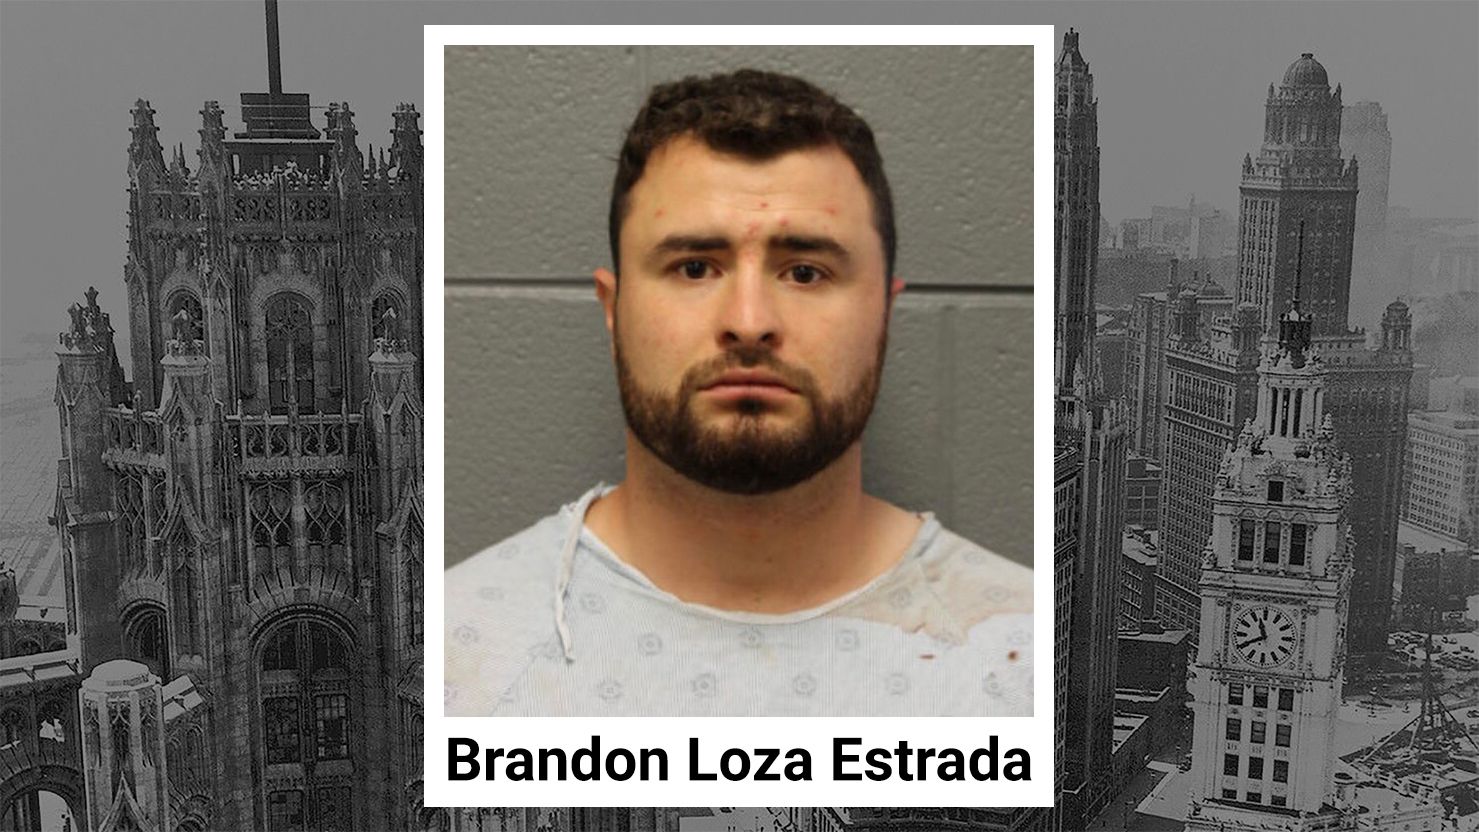 West Lawn man charged with murder during Little Village fight